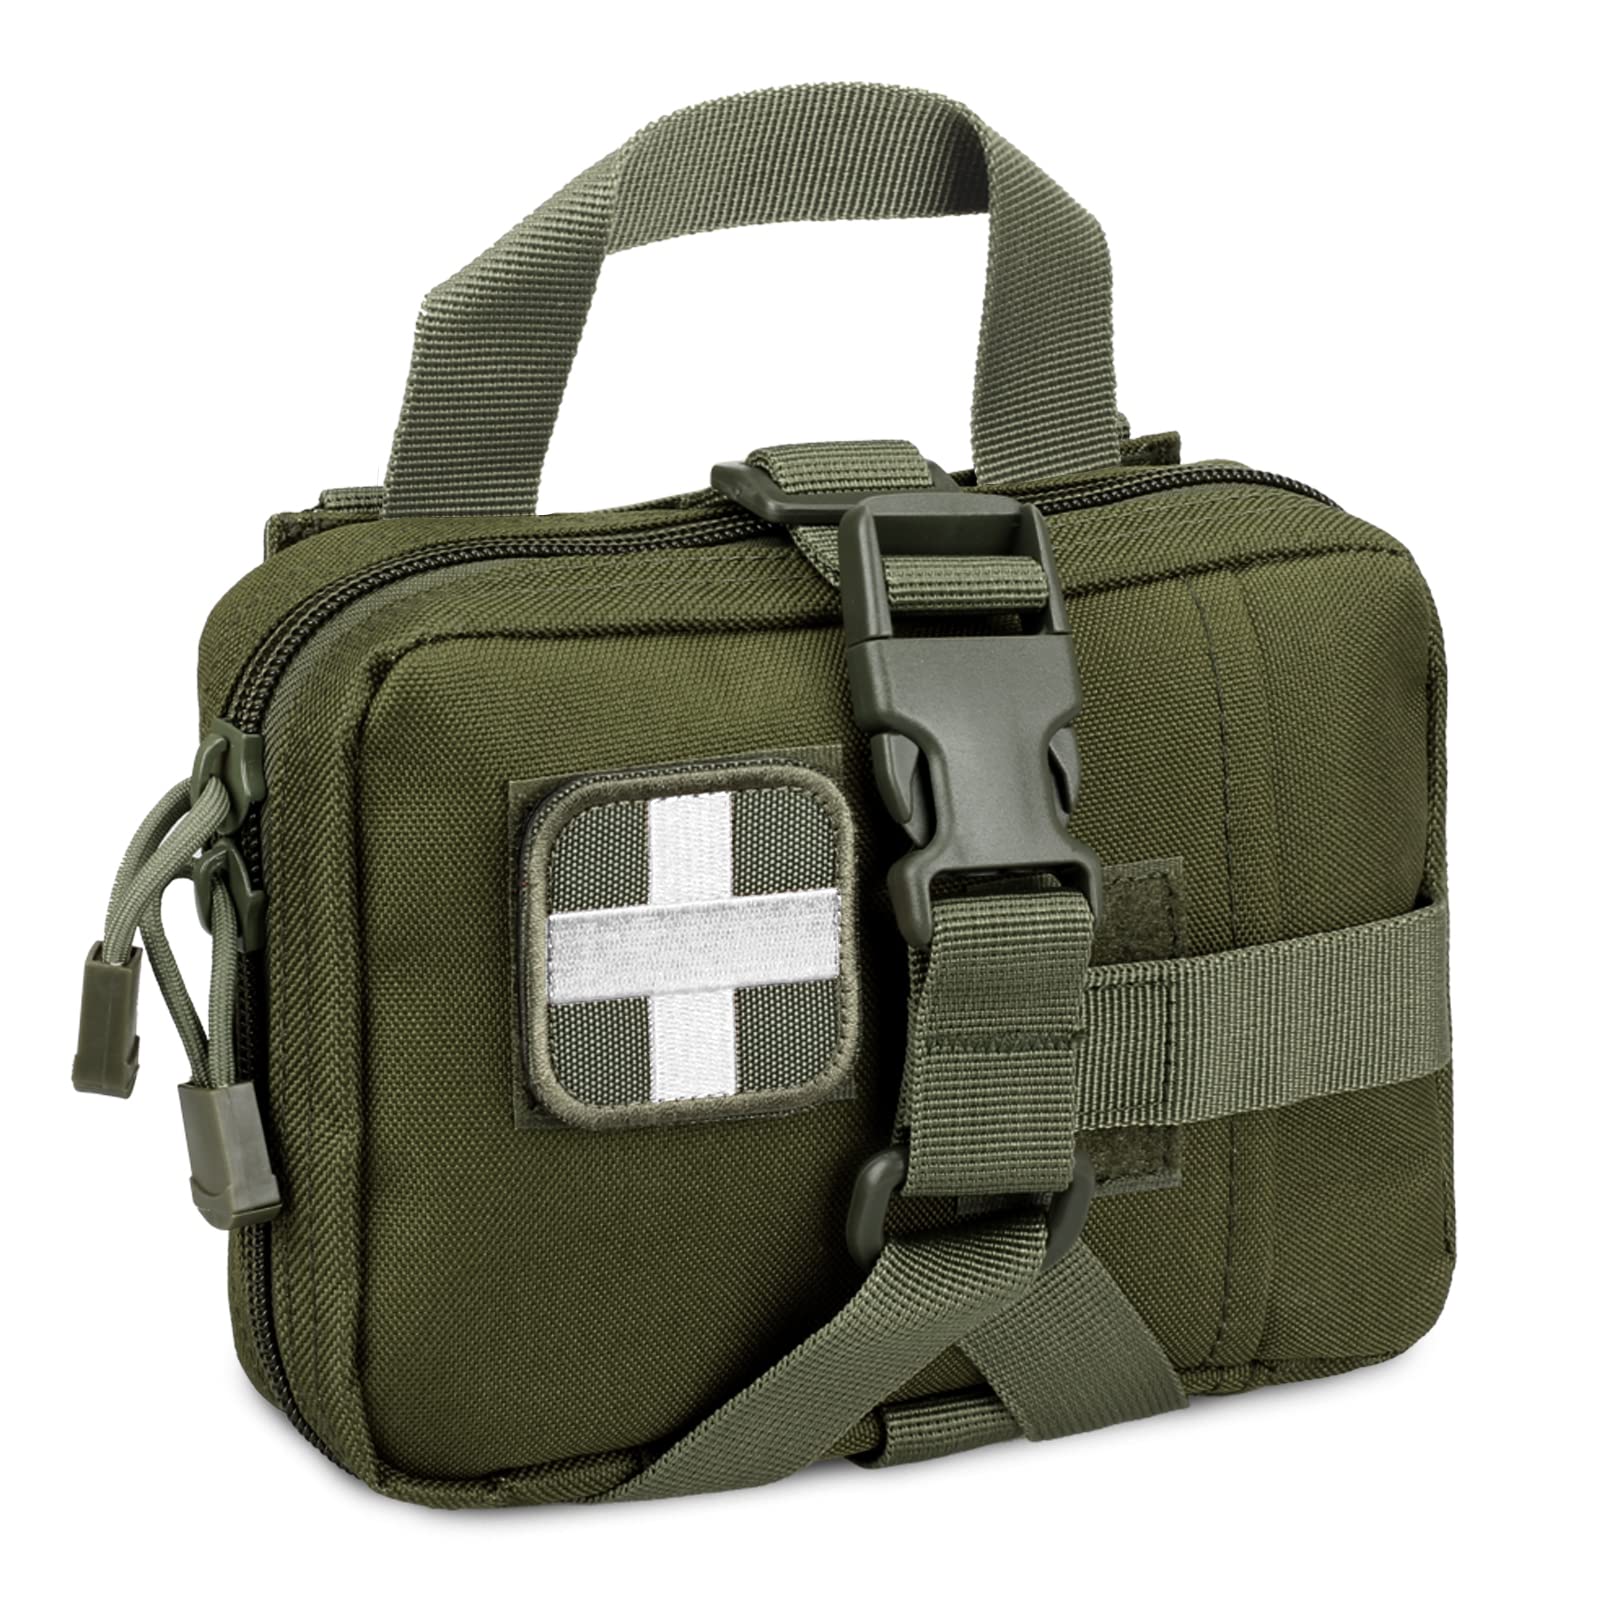 Livans Tactical Emt Pouch, Rip Away Molle Medical Pouches Ifak Tear-Away First Aid Kit Emergency Survival Bag For Travel Outdoor